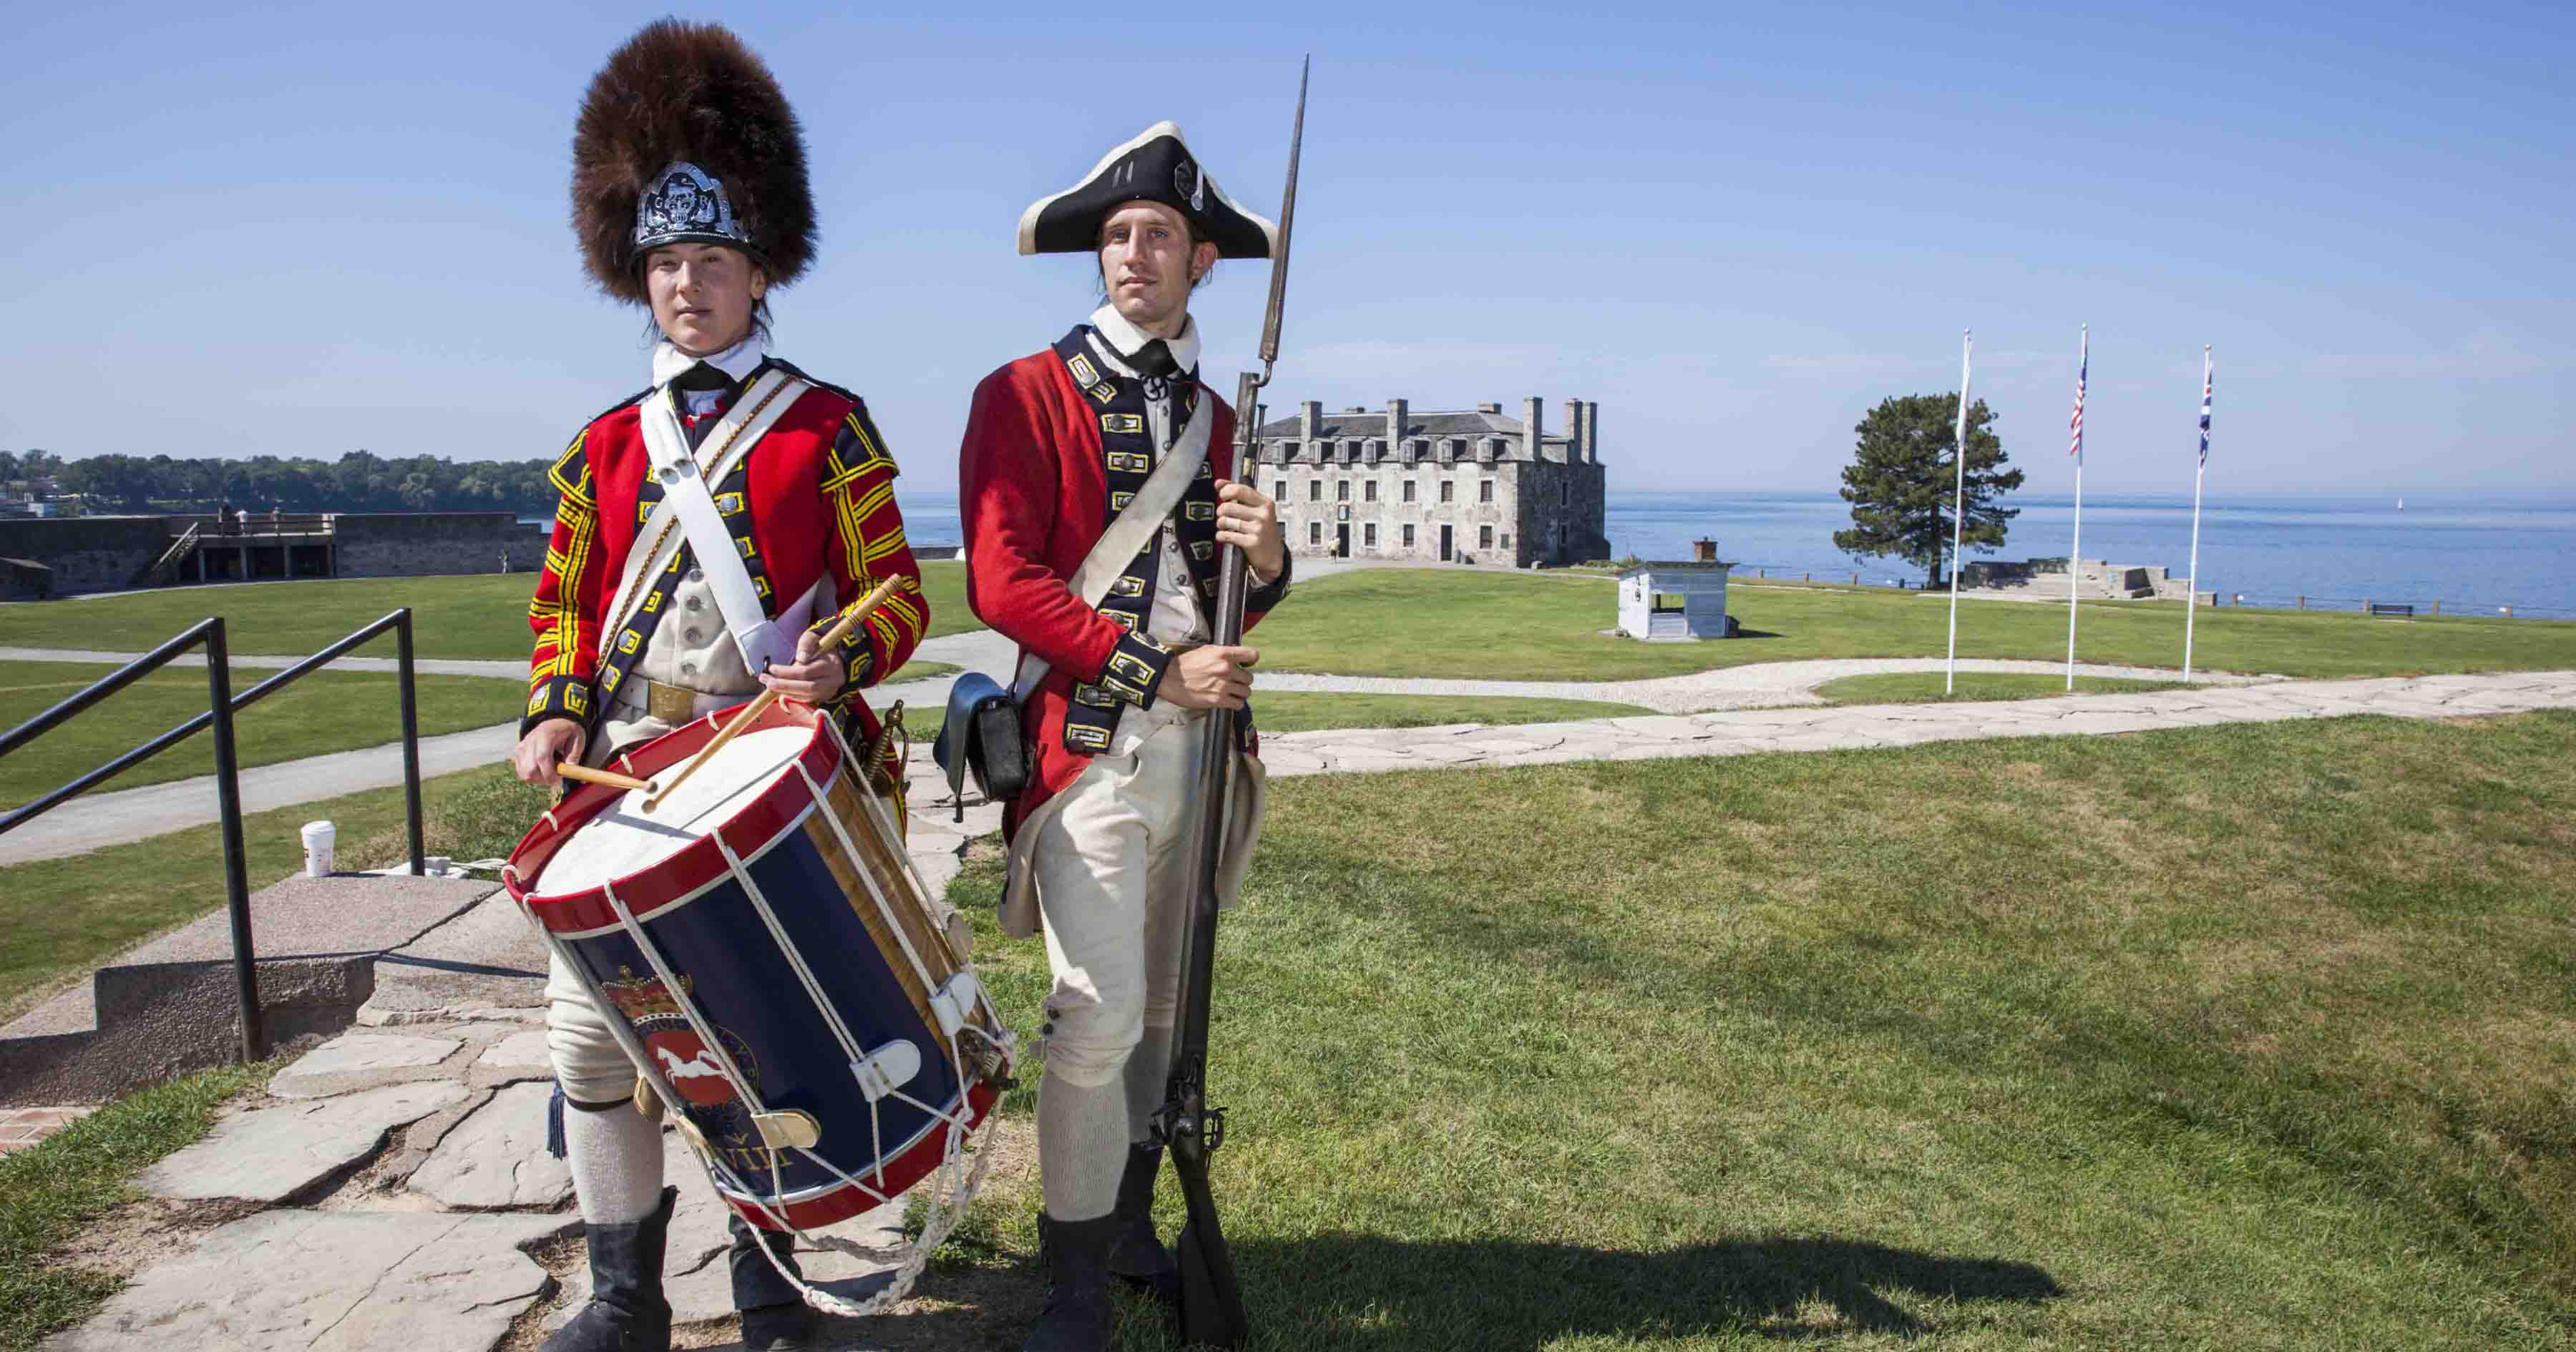 Soldiers at Old Fort Niagara